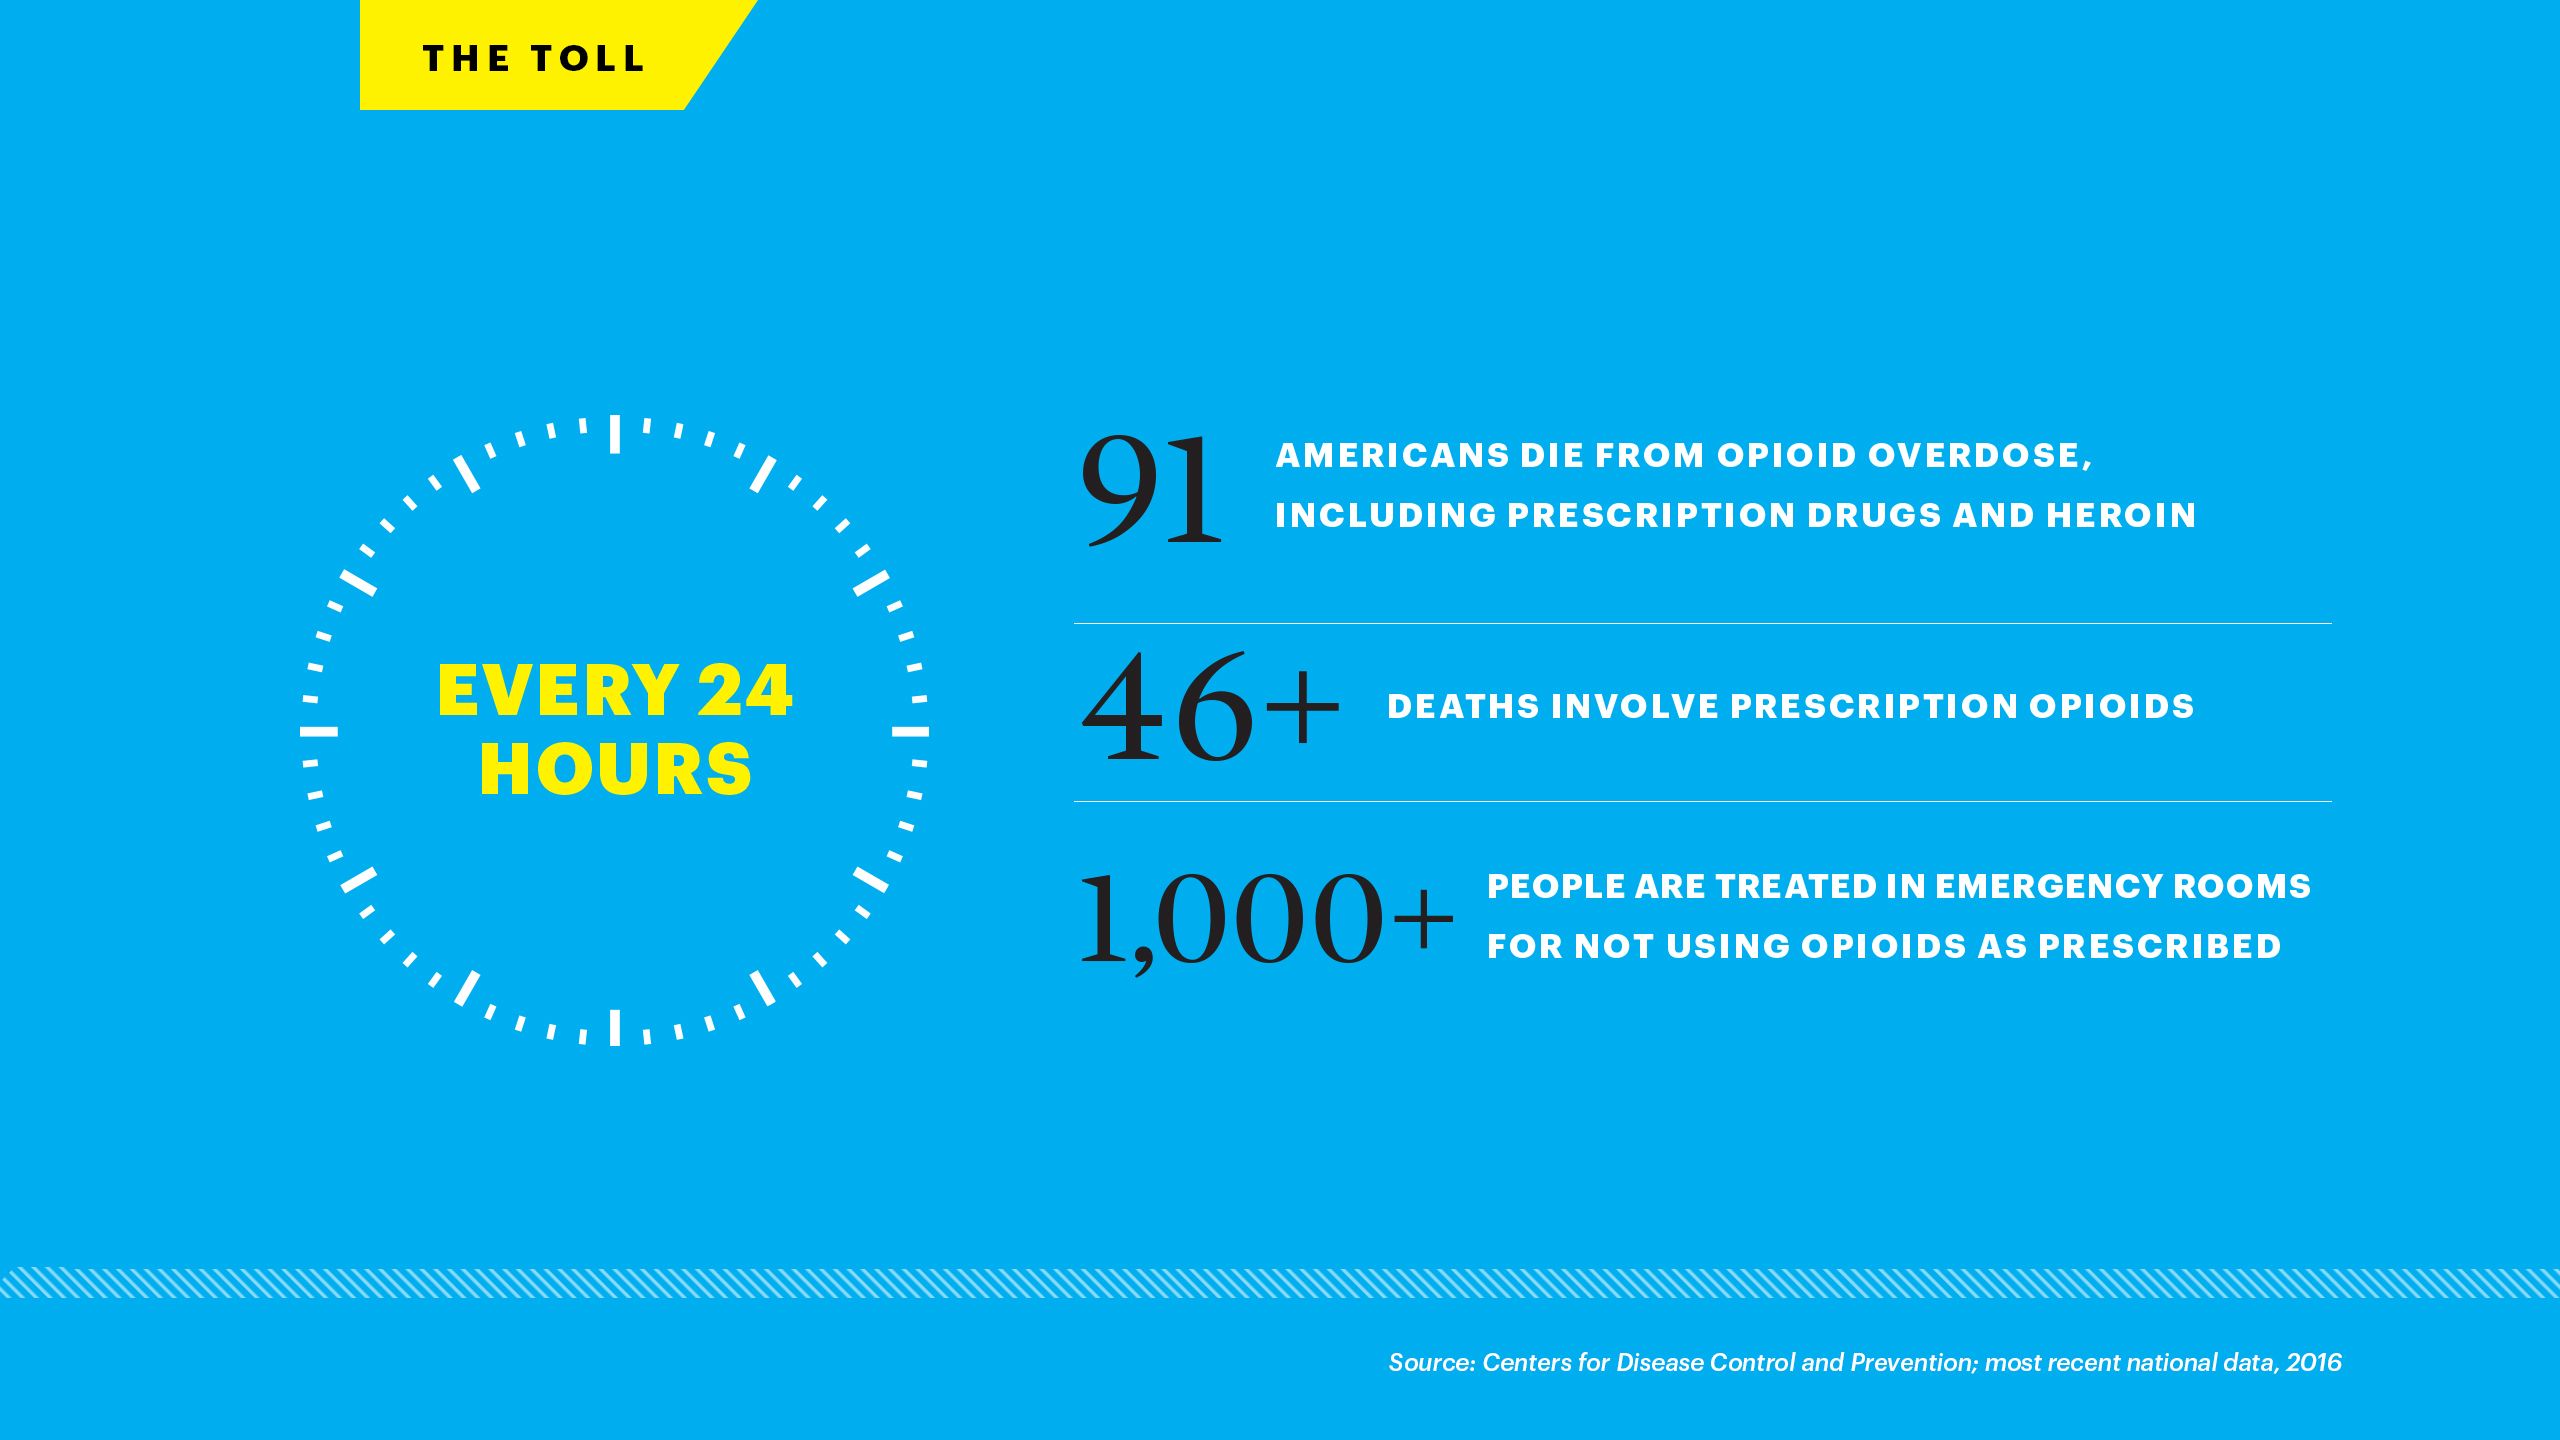 The Toll; Every 24 hours 91 Americans die from opioid overdose, including prescription drugs and heroin